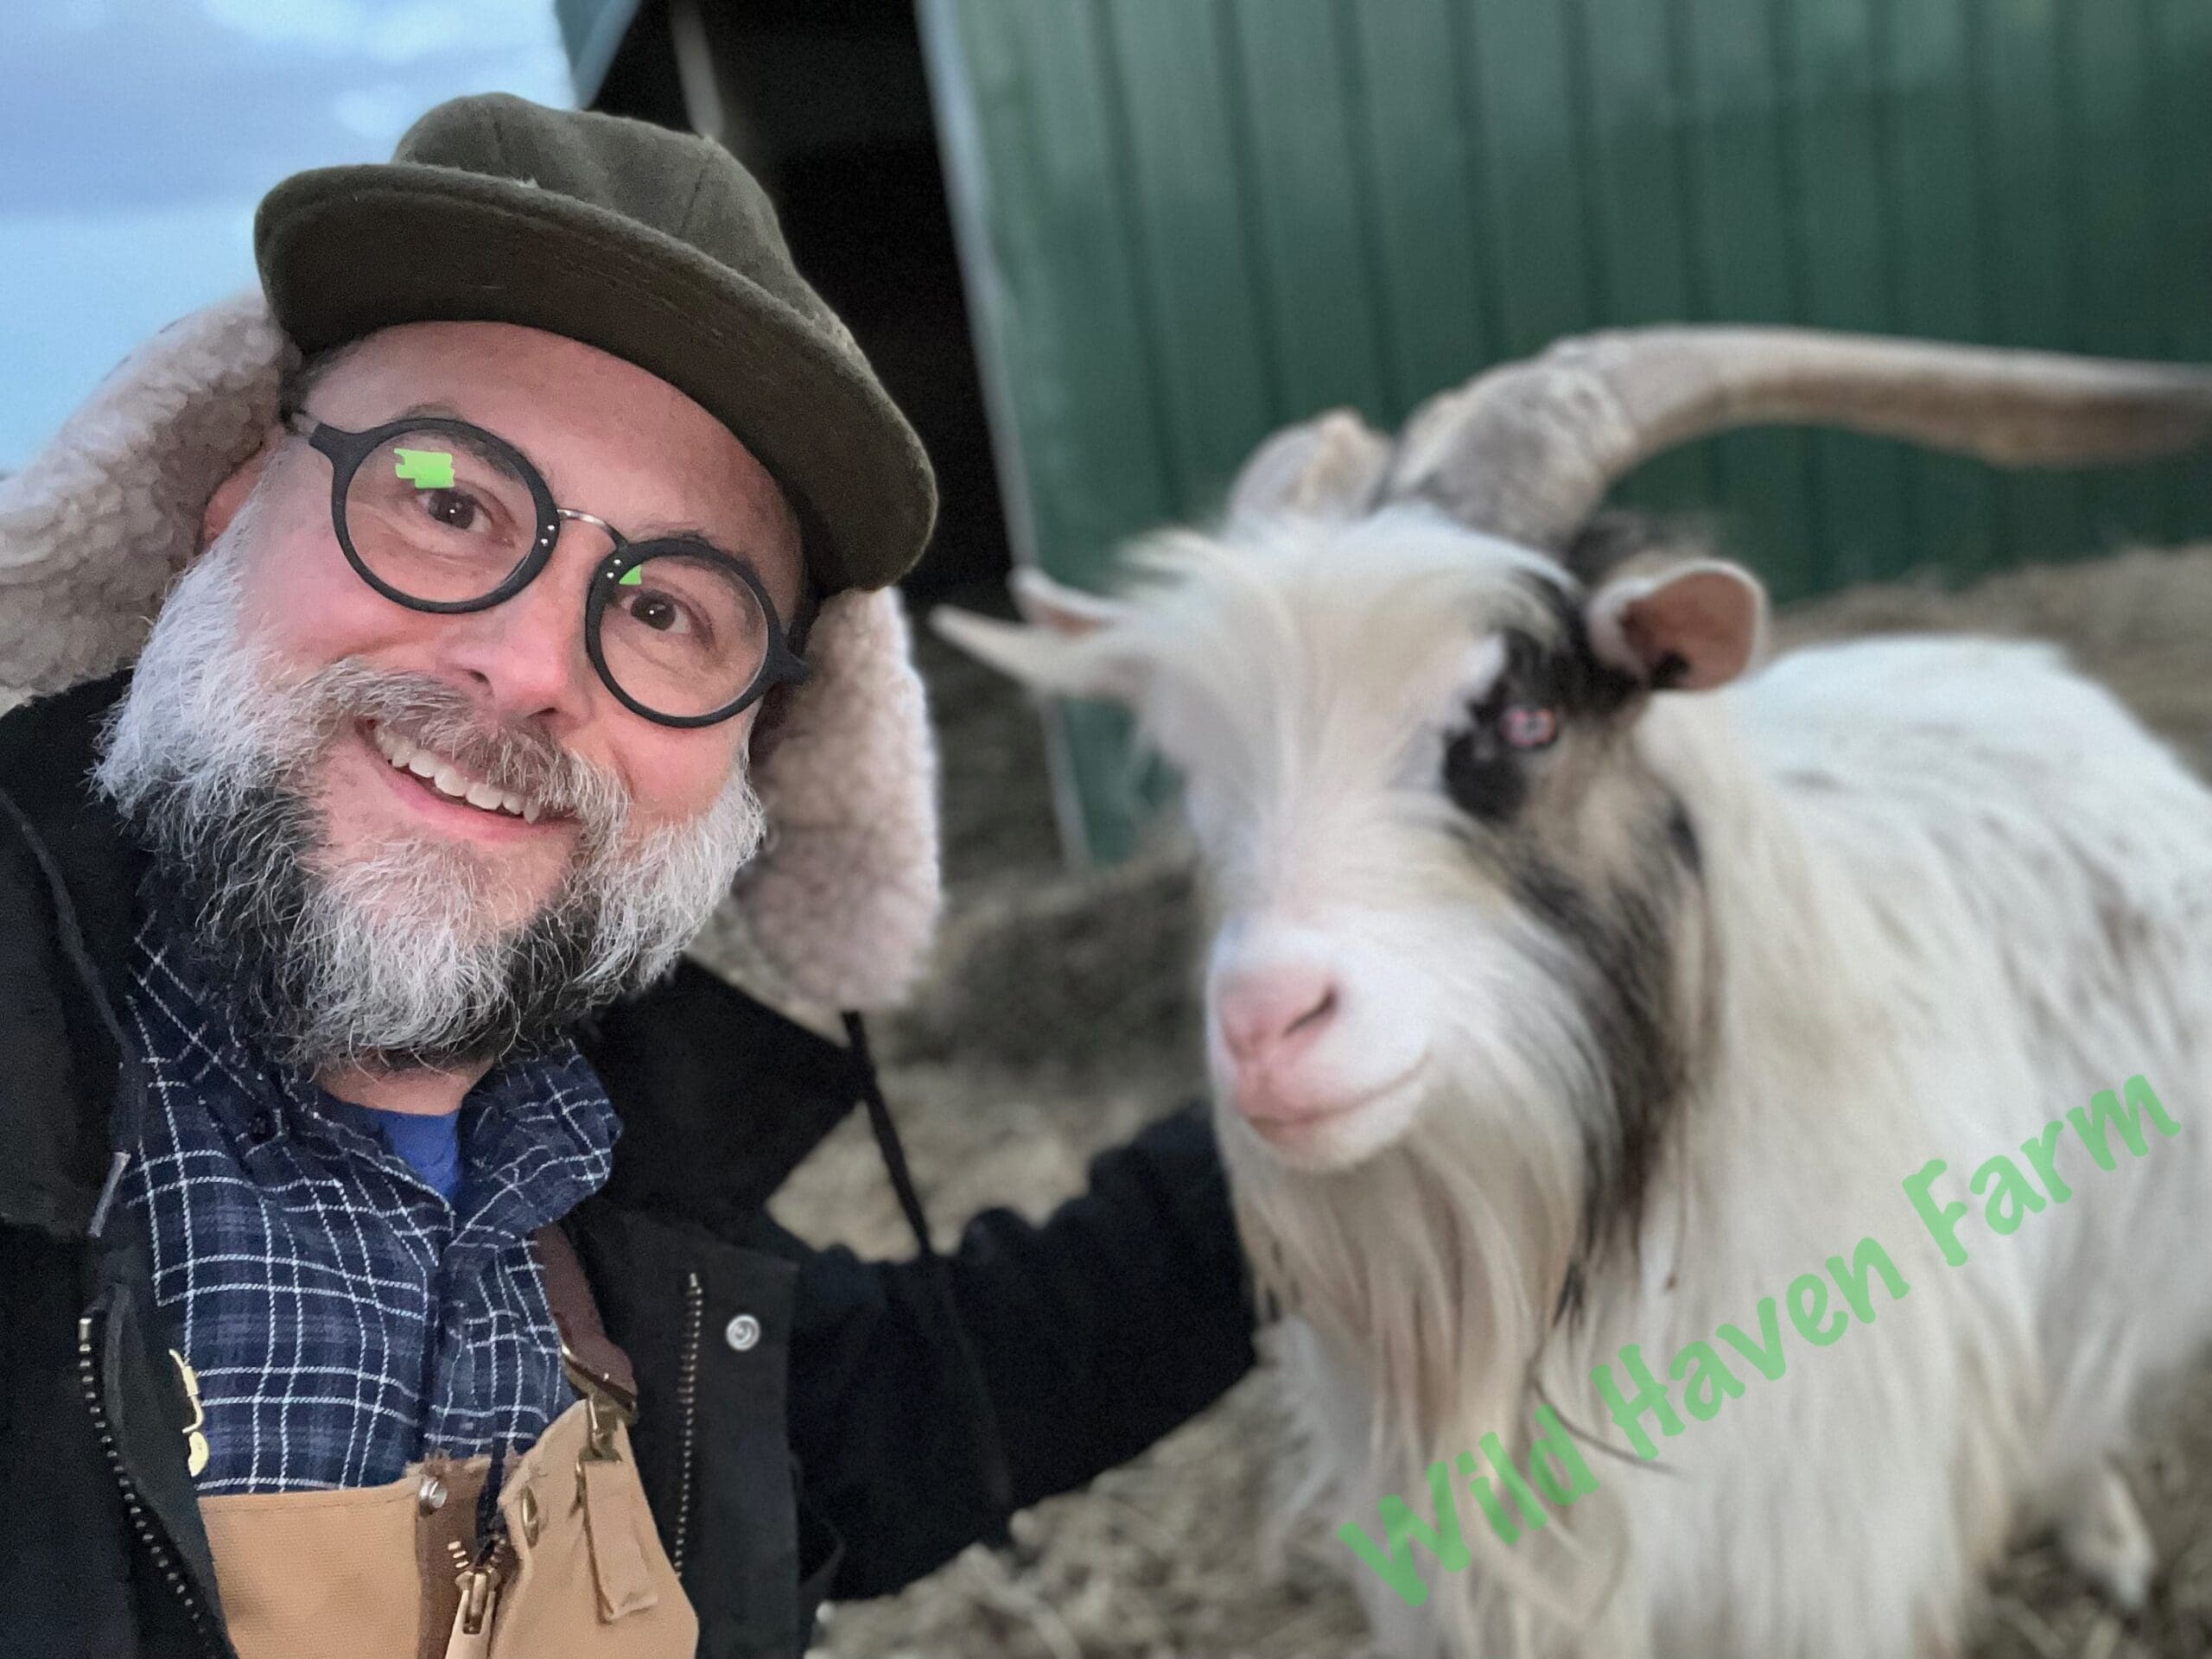 Man and goat (Blizzard Sky) taking a selfie